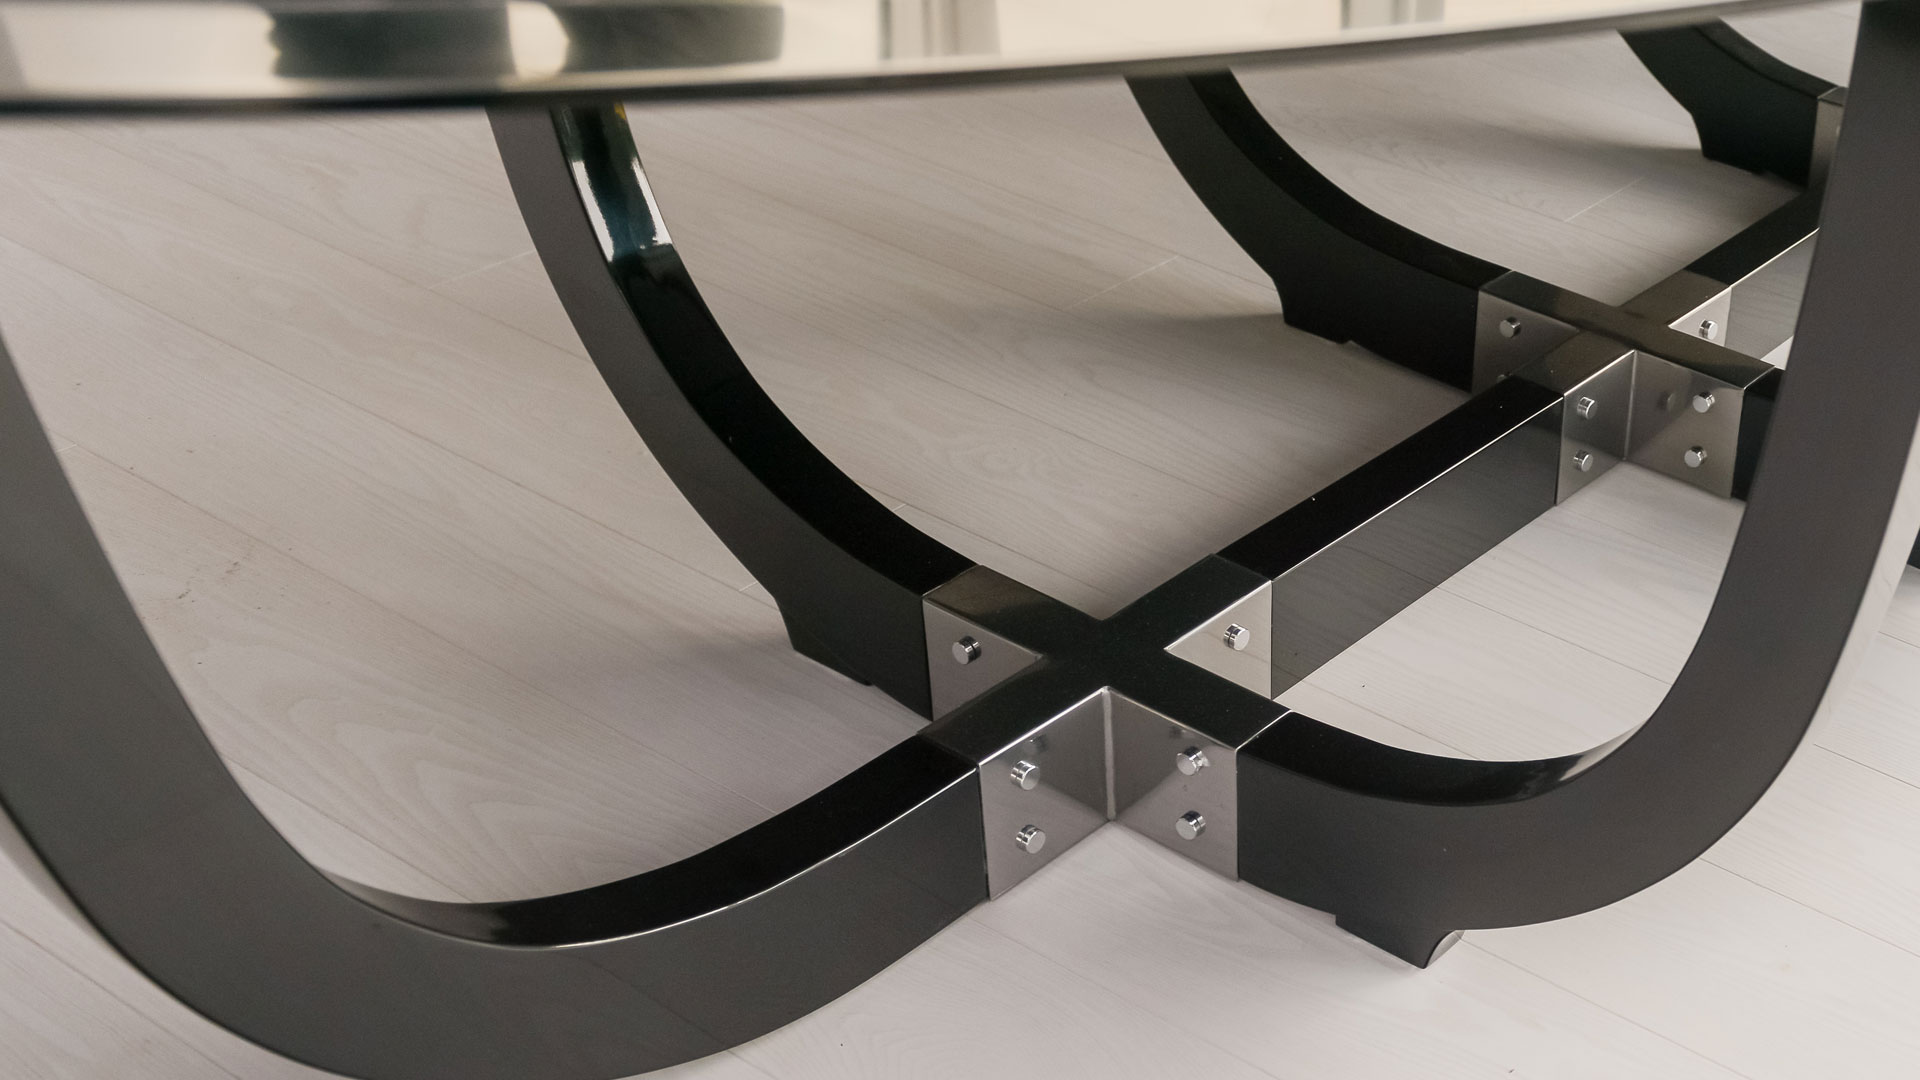 Black Pearl Classic dining table in interior detail 3